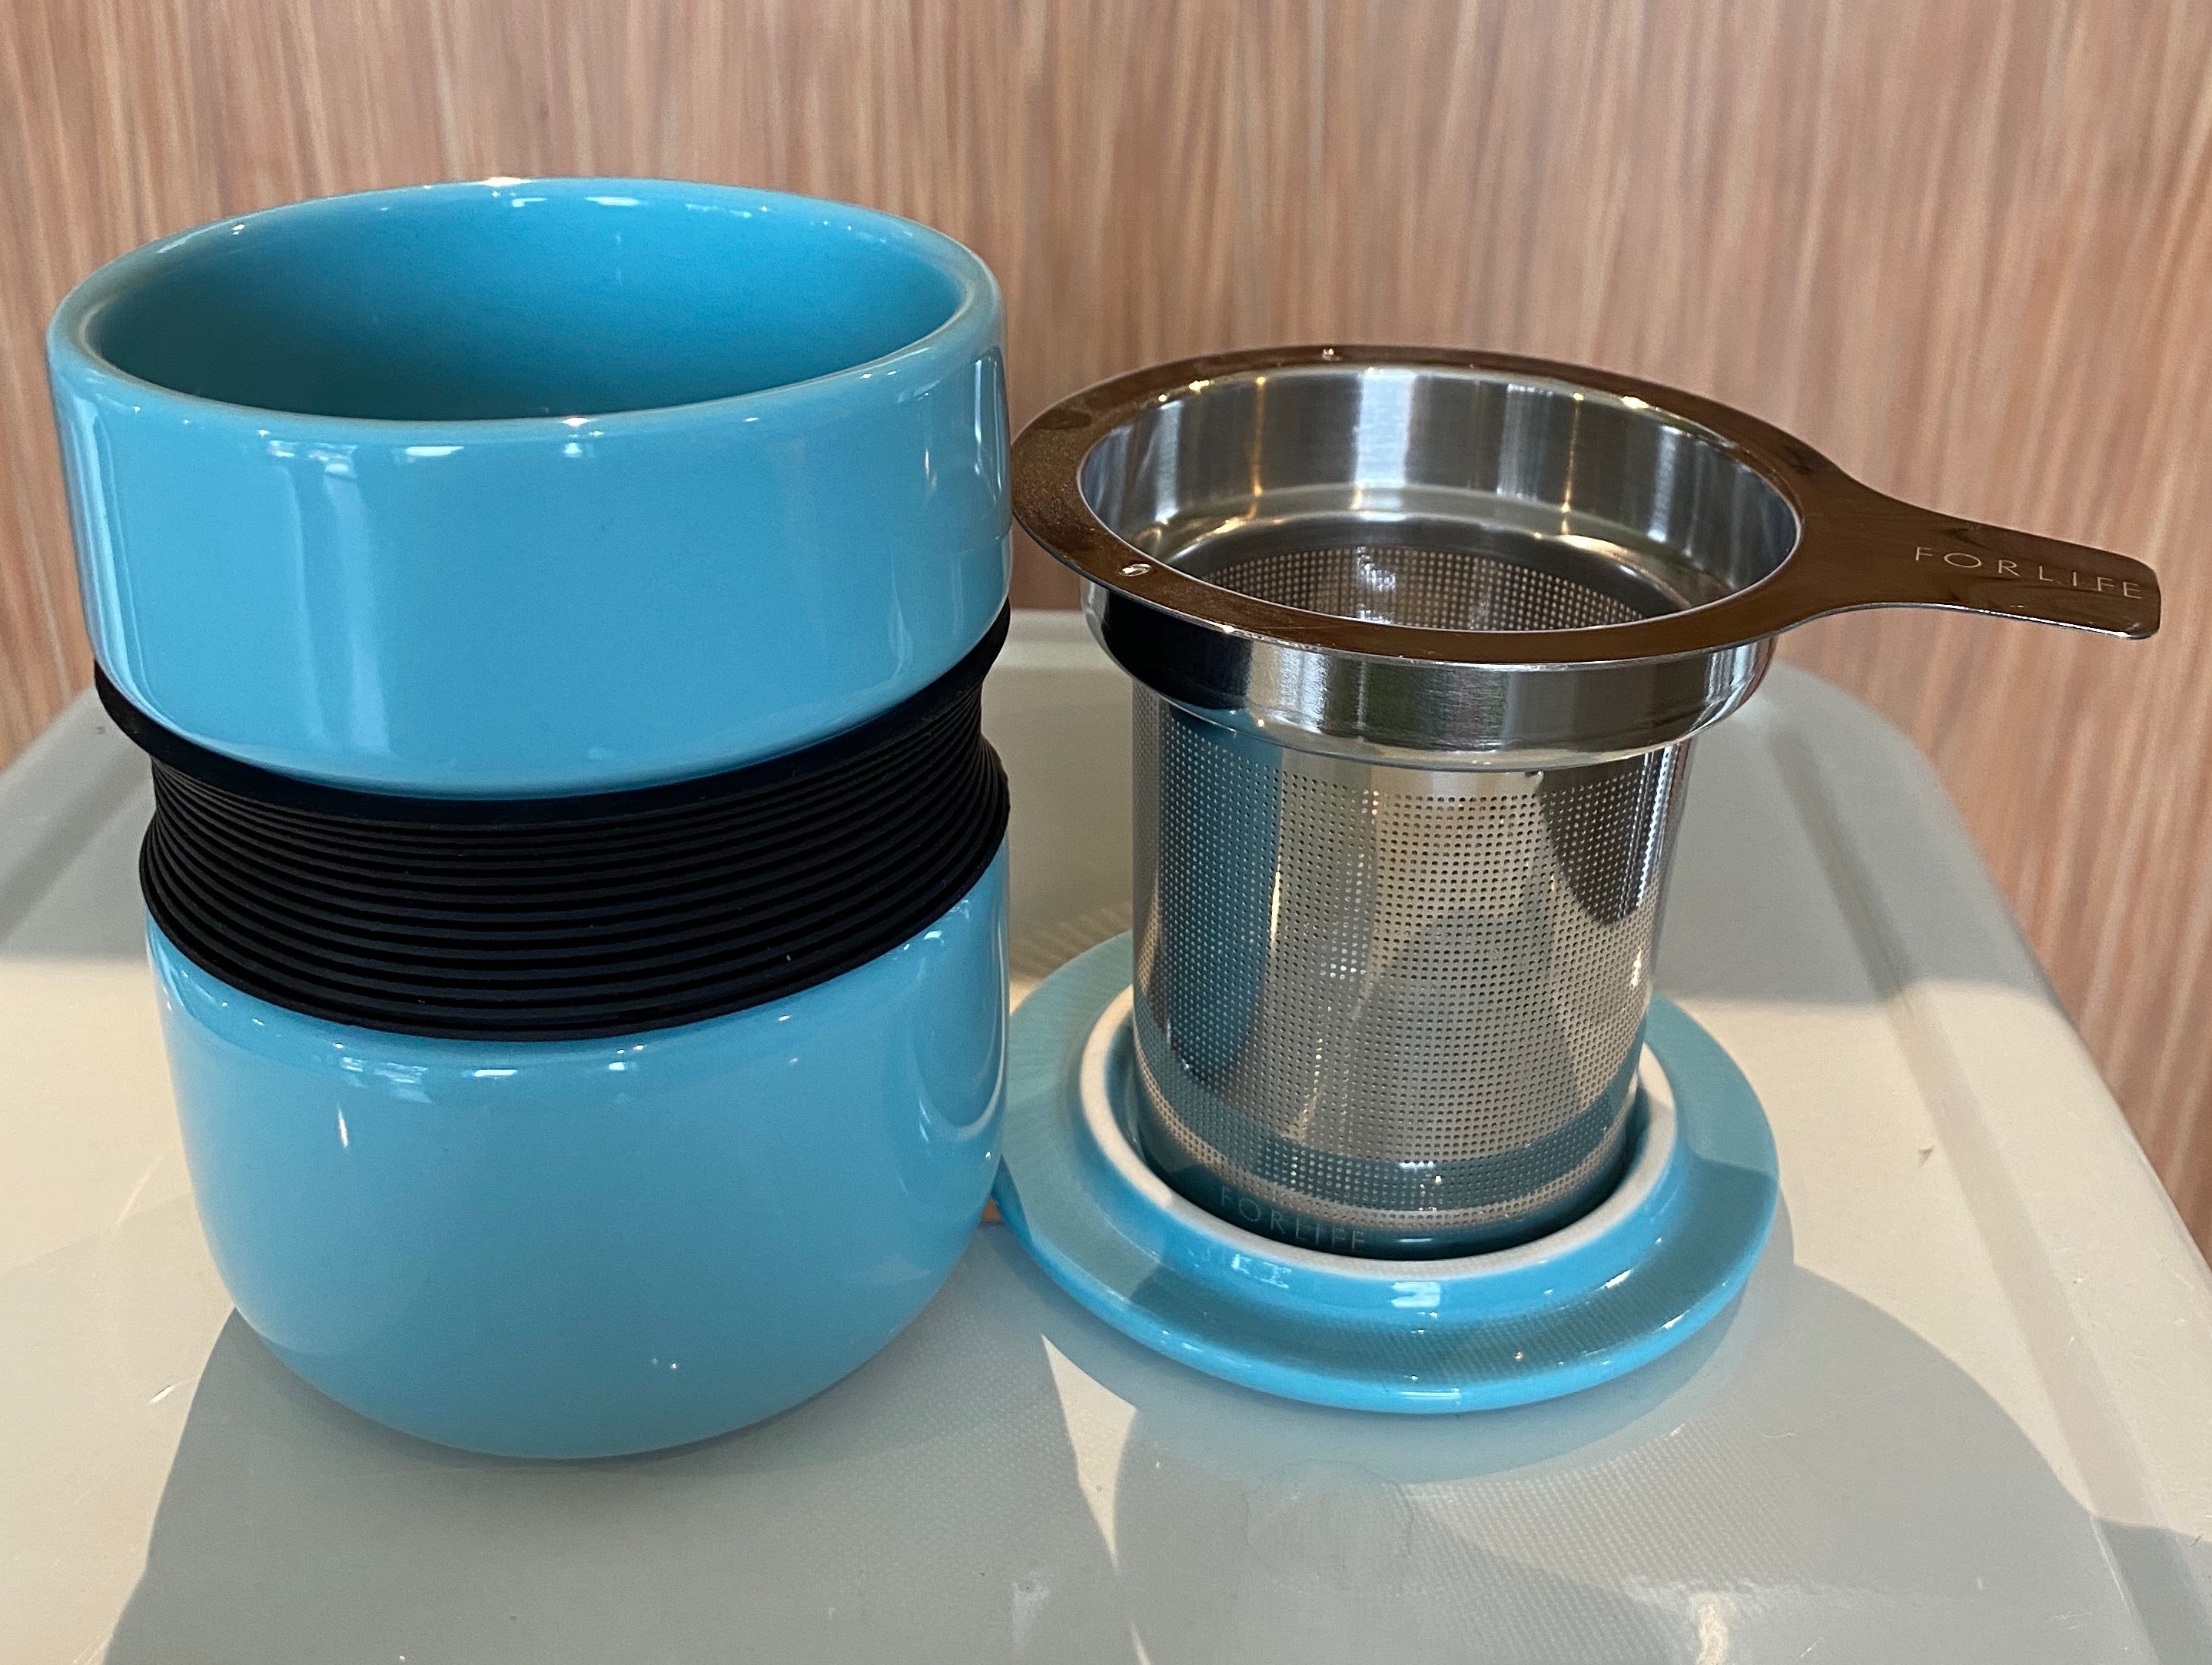 Turquoise Asian style tea mug with infuser & lid, For Life brand